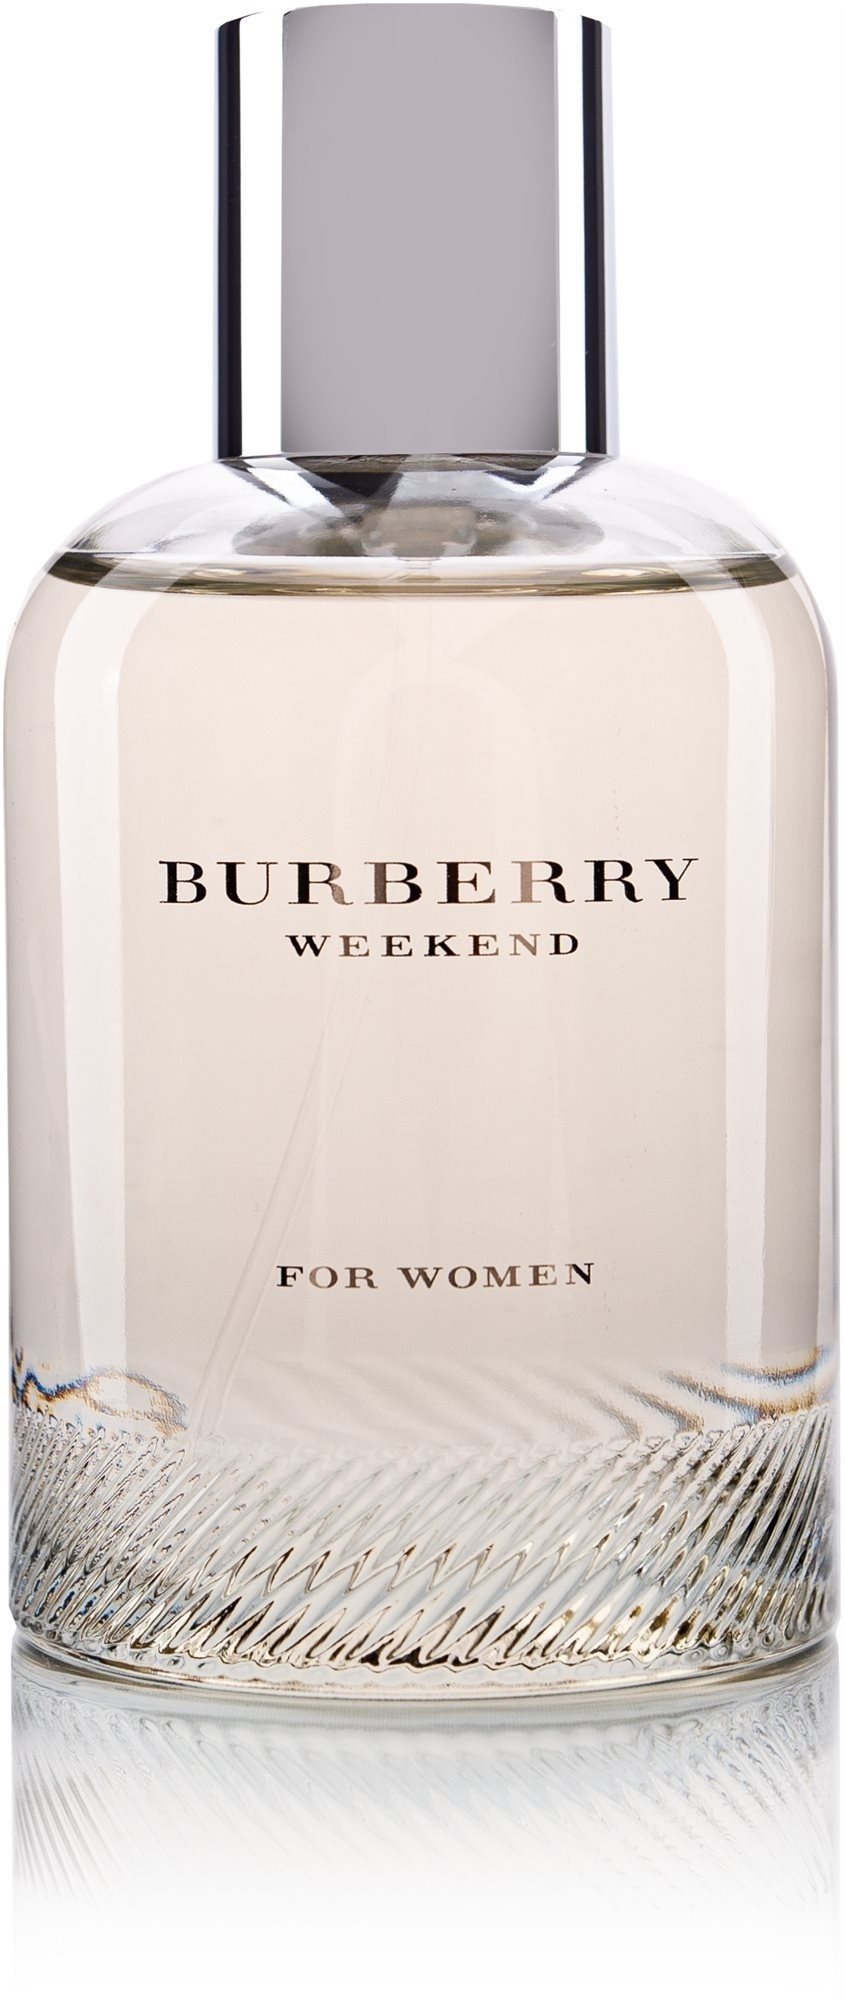 BURBERRY Weekend for Women EdP